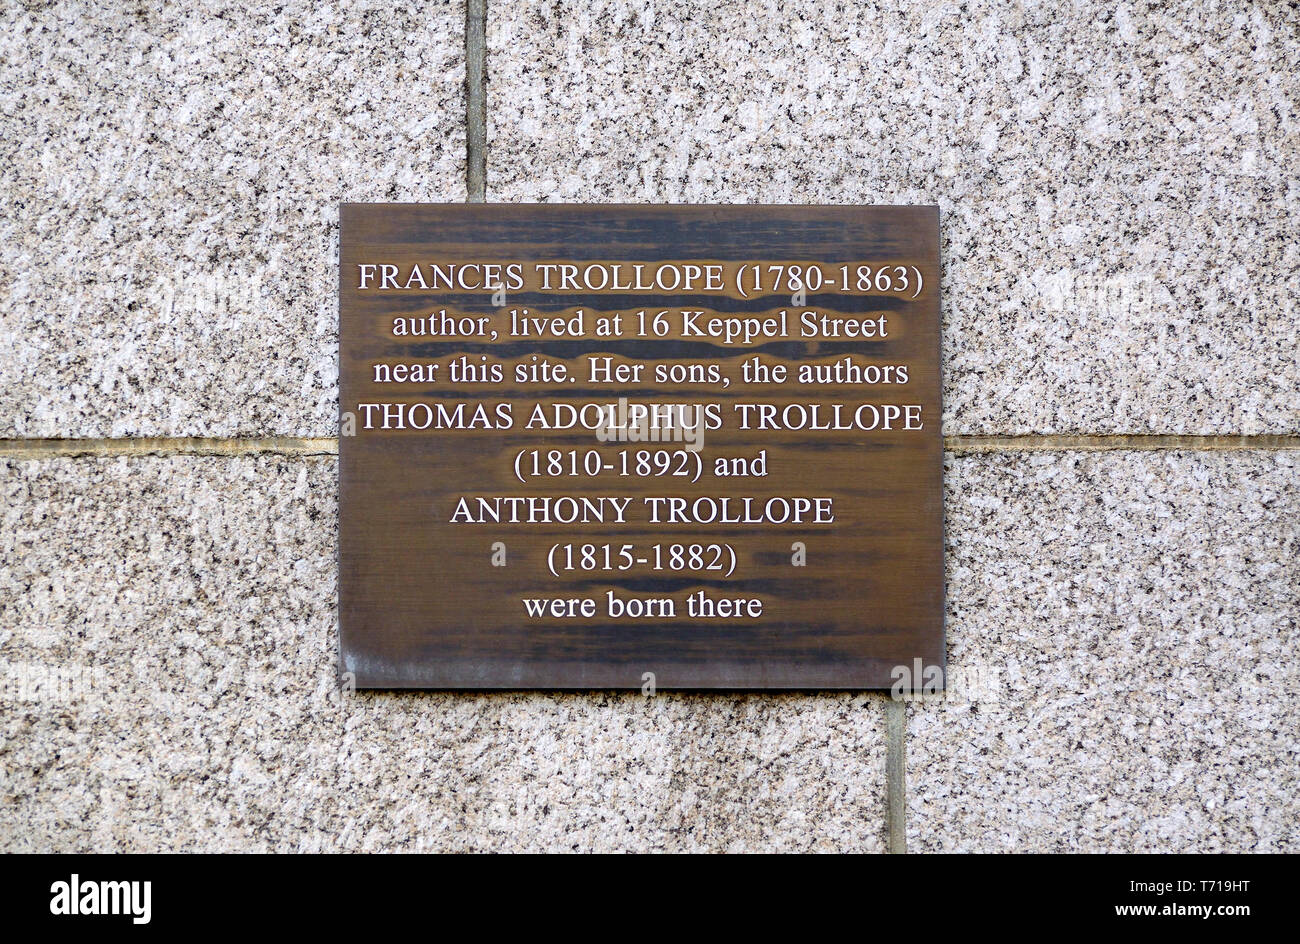 London, England, UK. Commemorative Plaque: 'Frances Trollope (1780-1863) author, lived at 16 Keppel Street near this site. Her sons, the authors Thoma Stock Photo